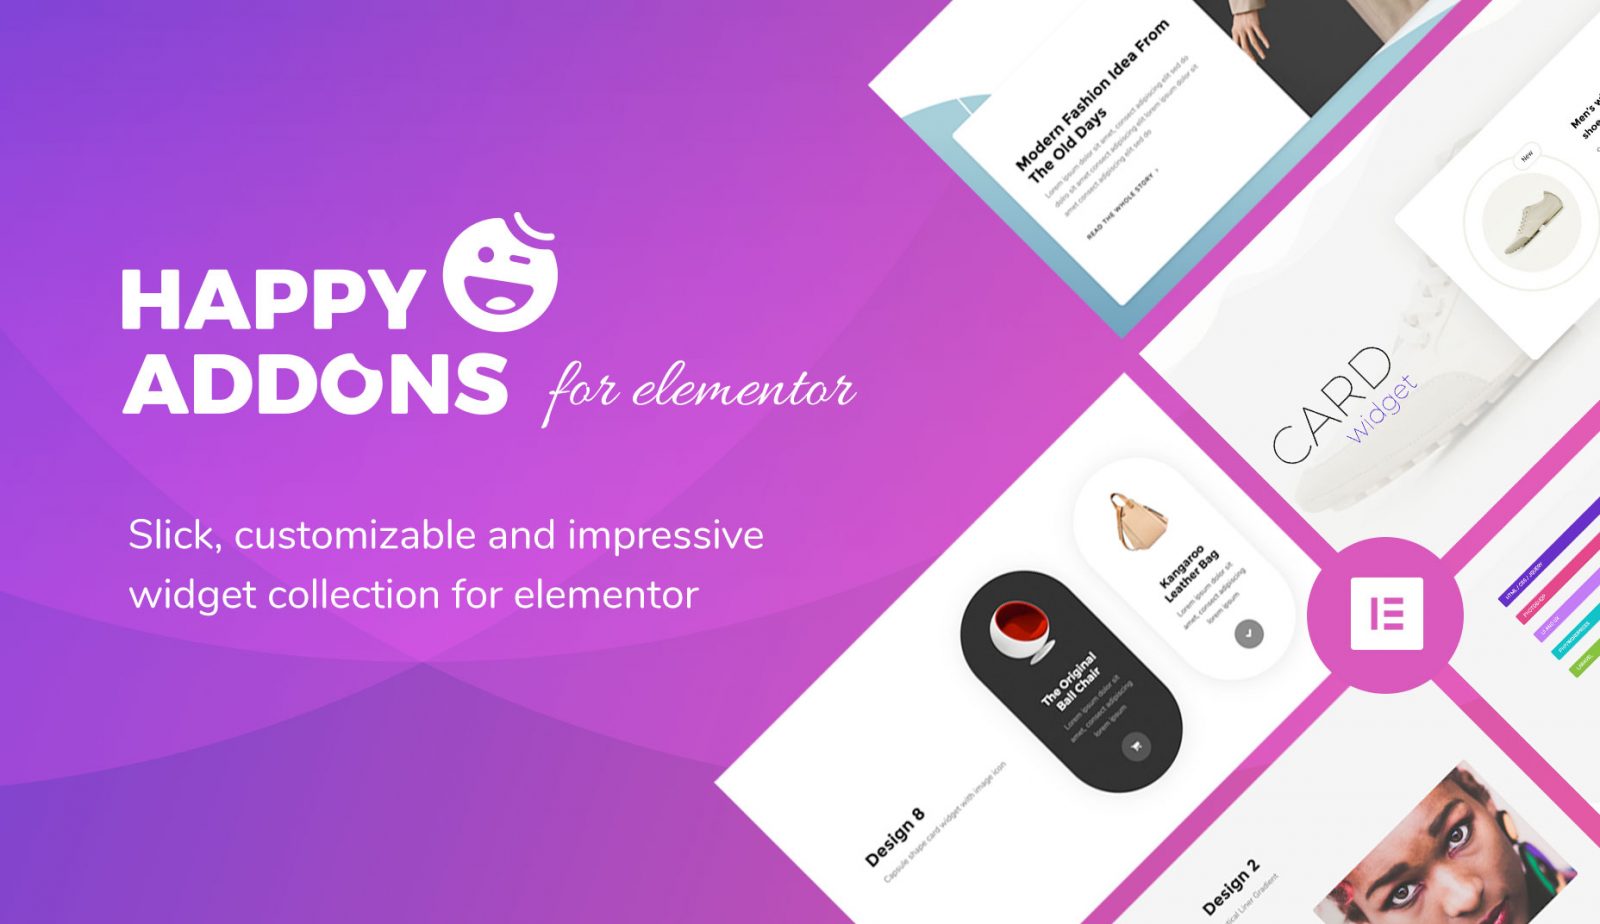 Power Up Your Elementor Website with HappyAddons